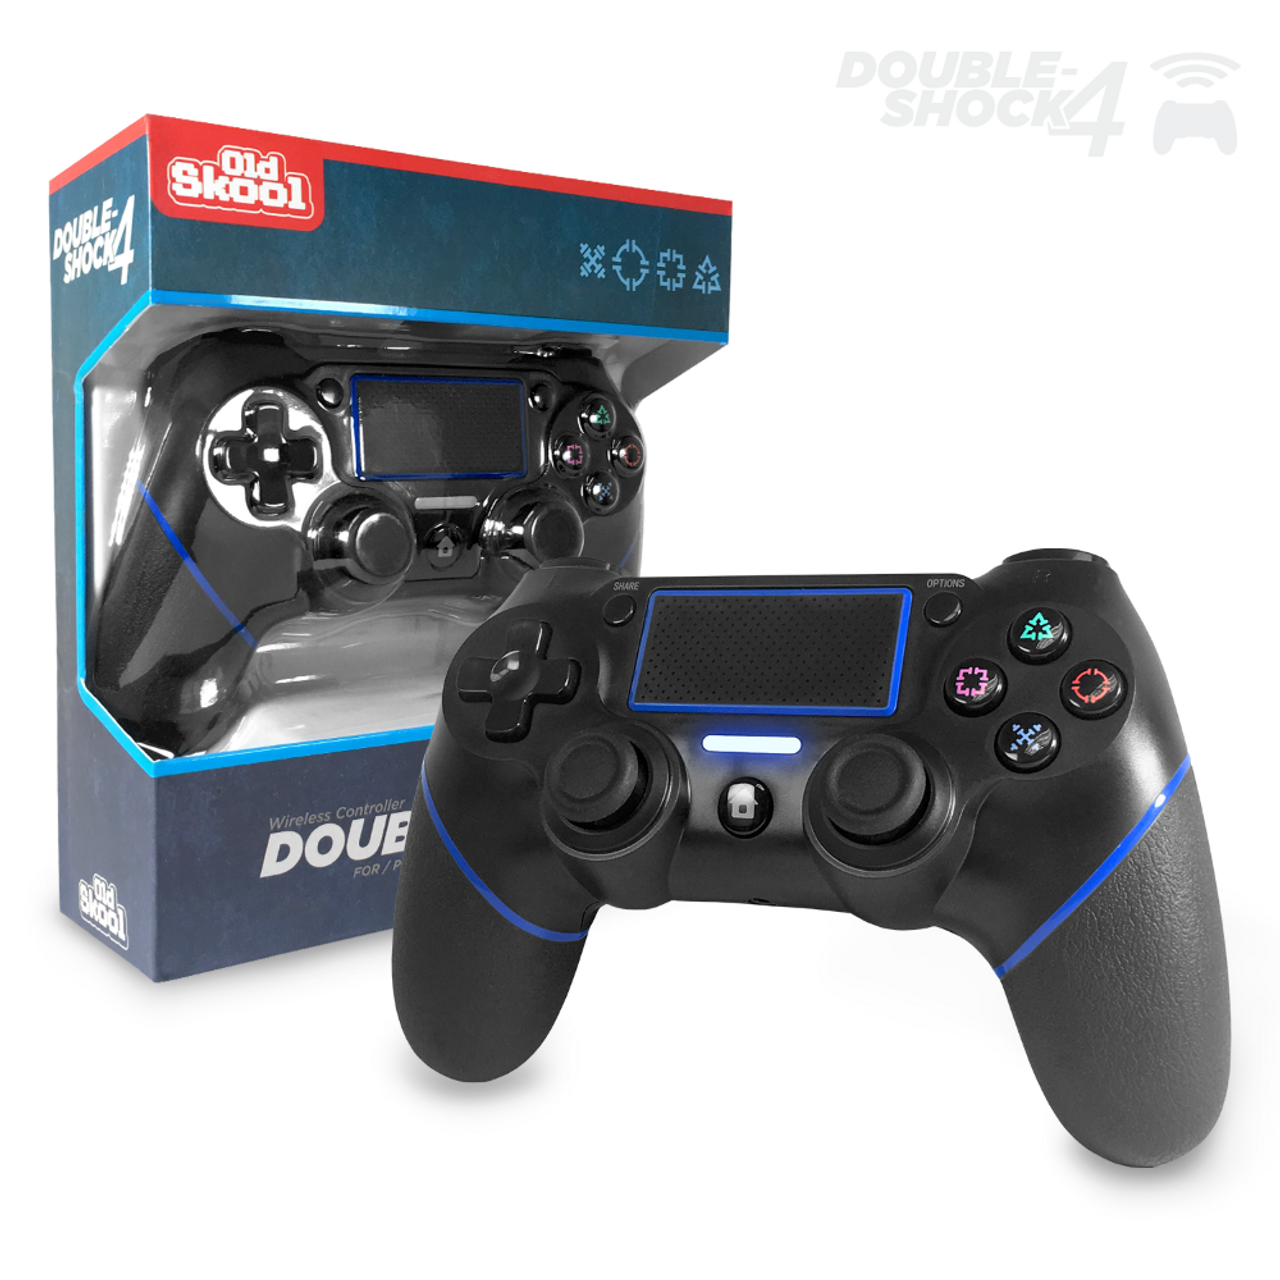 Double-Shock 4 for PlayStation available at Videogamesnewyork, NY